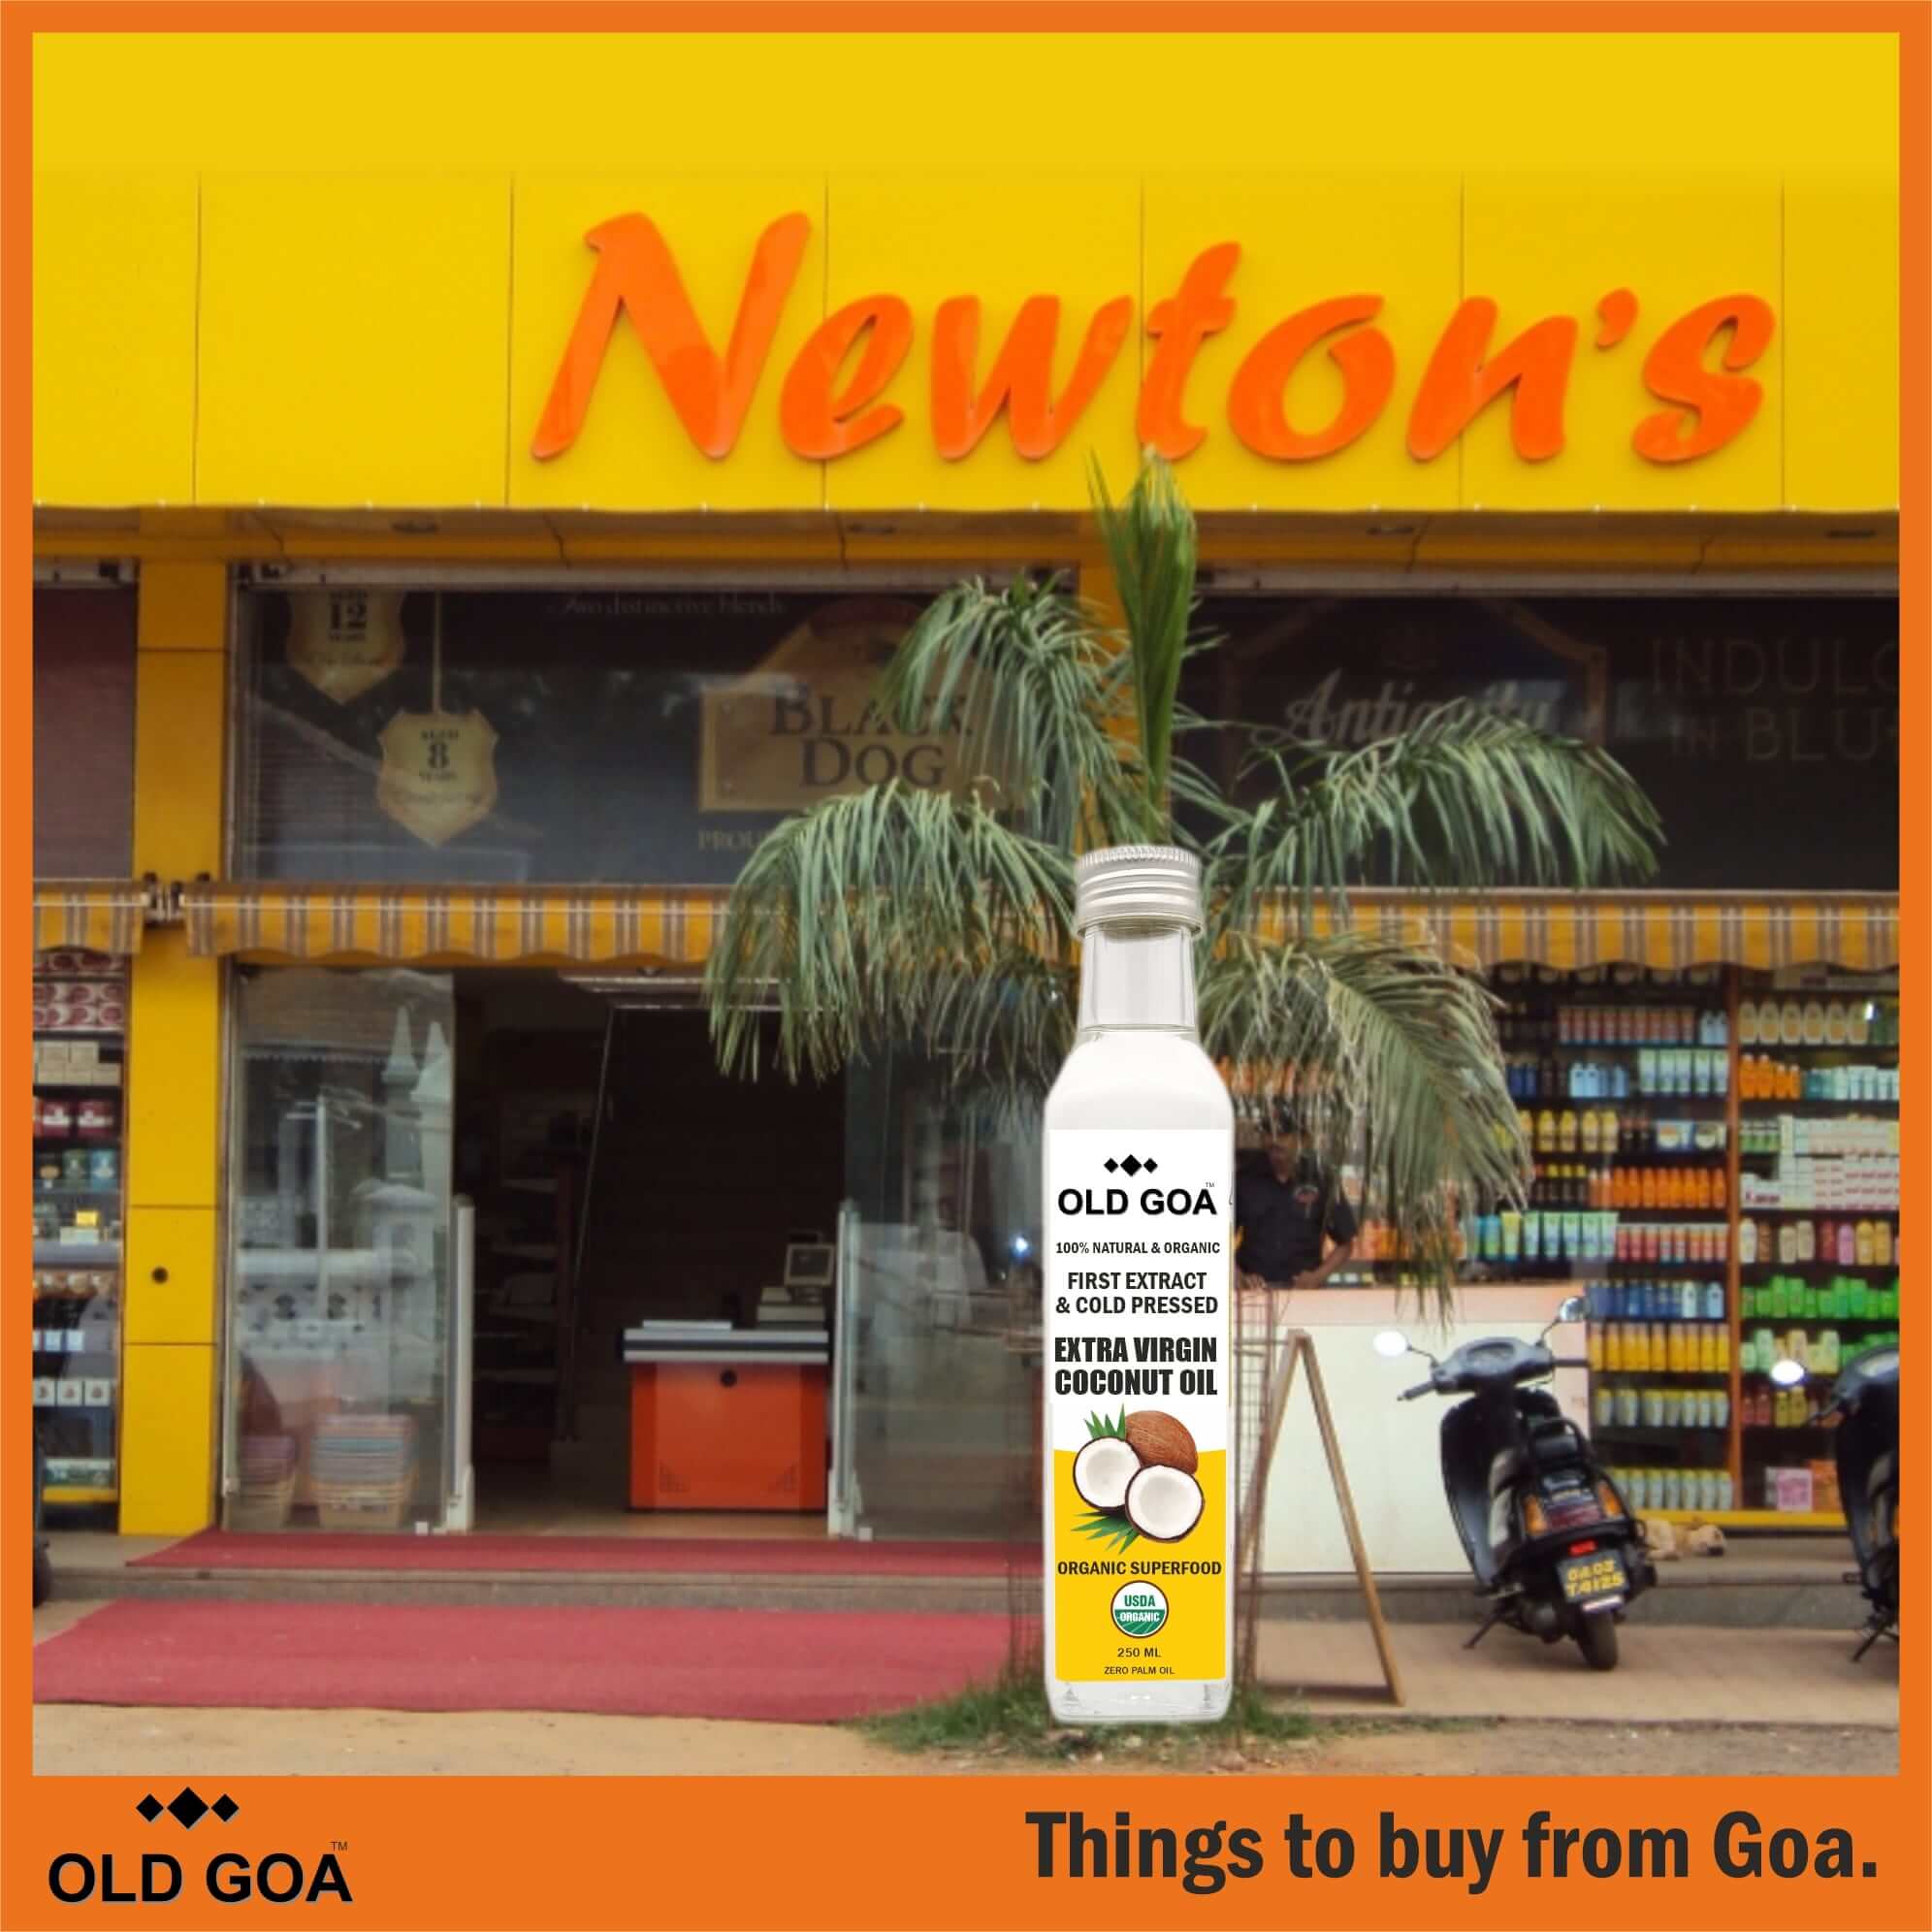 Things to buy from Goa